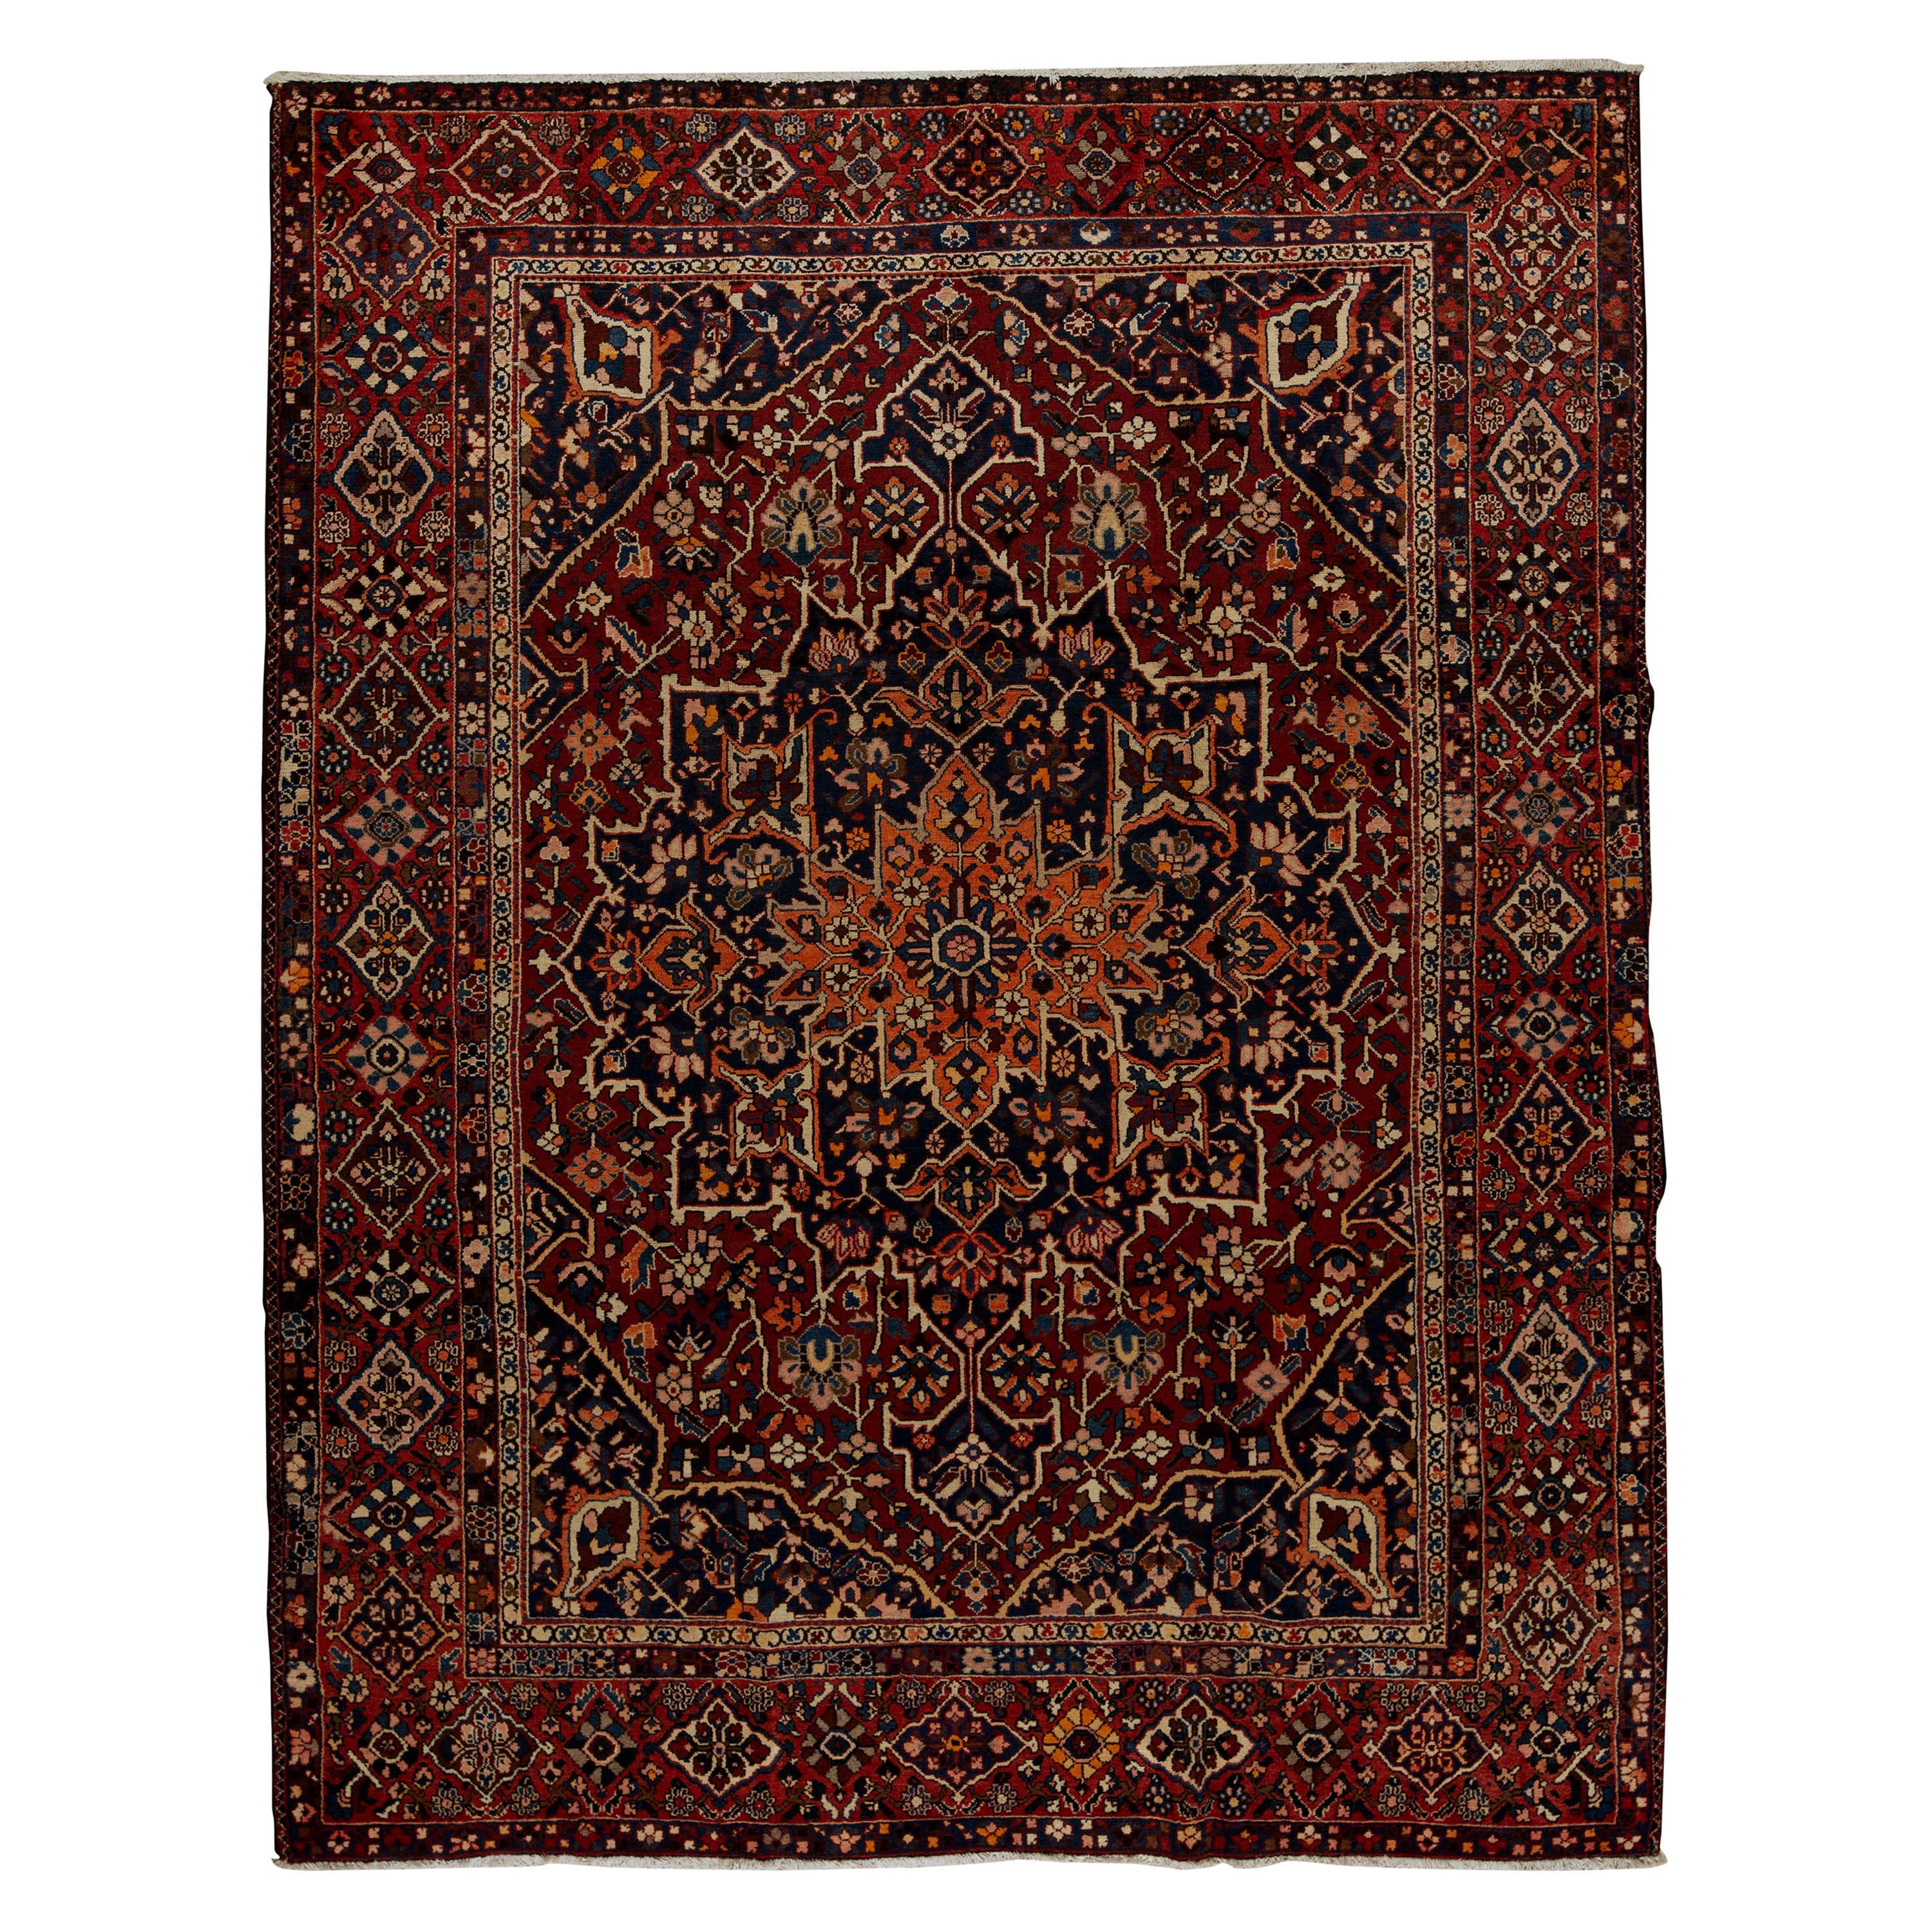 Antique Persian Fine Traditional Handwoven Luxury Wool Navy / Red Rug